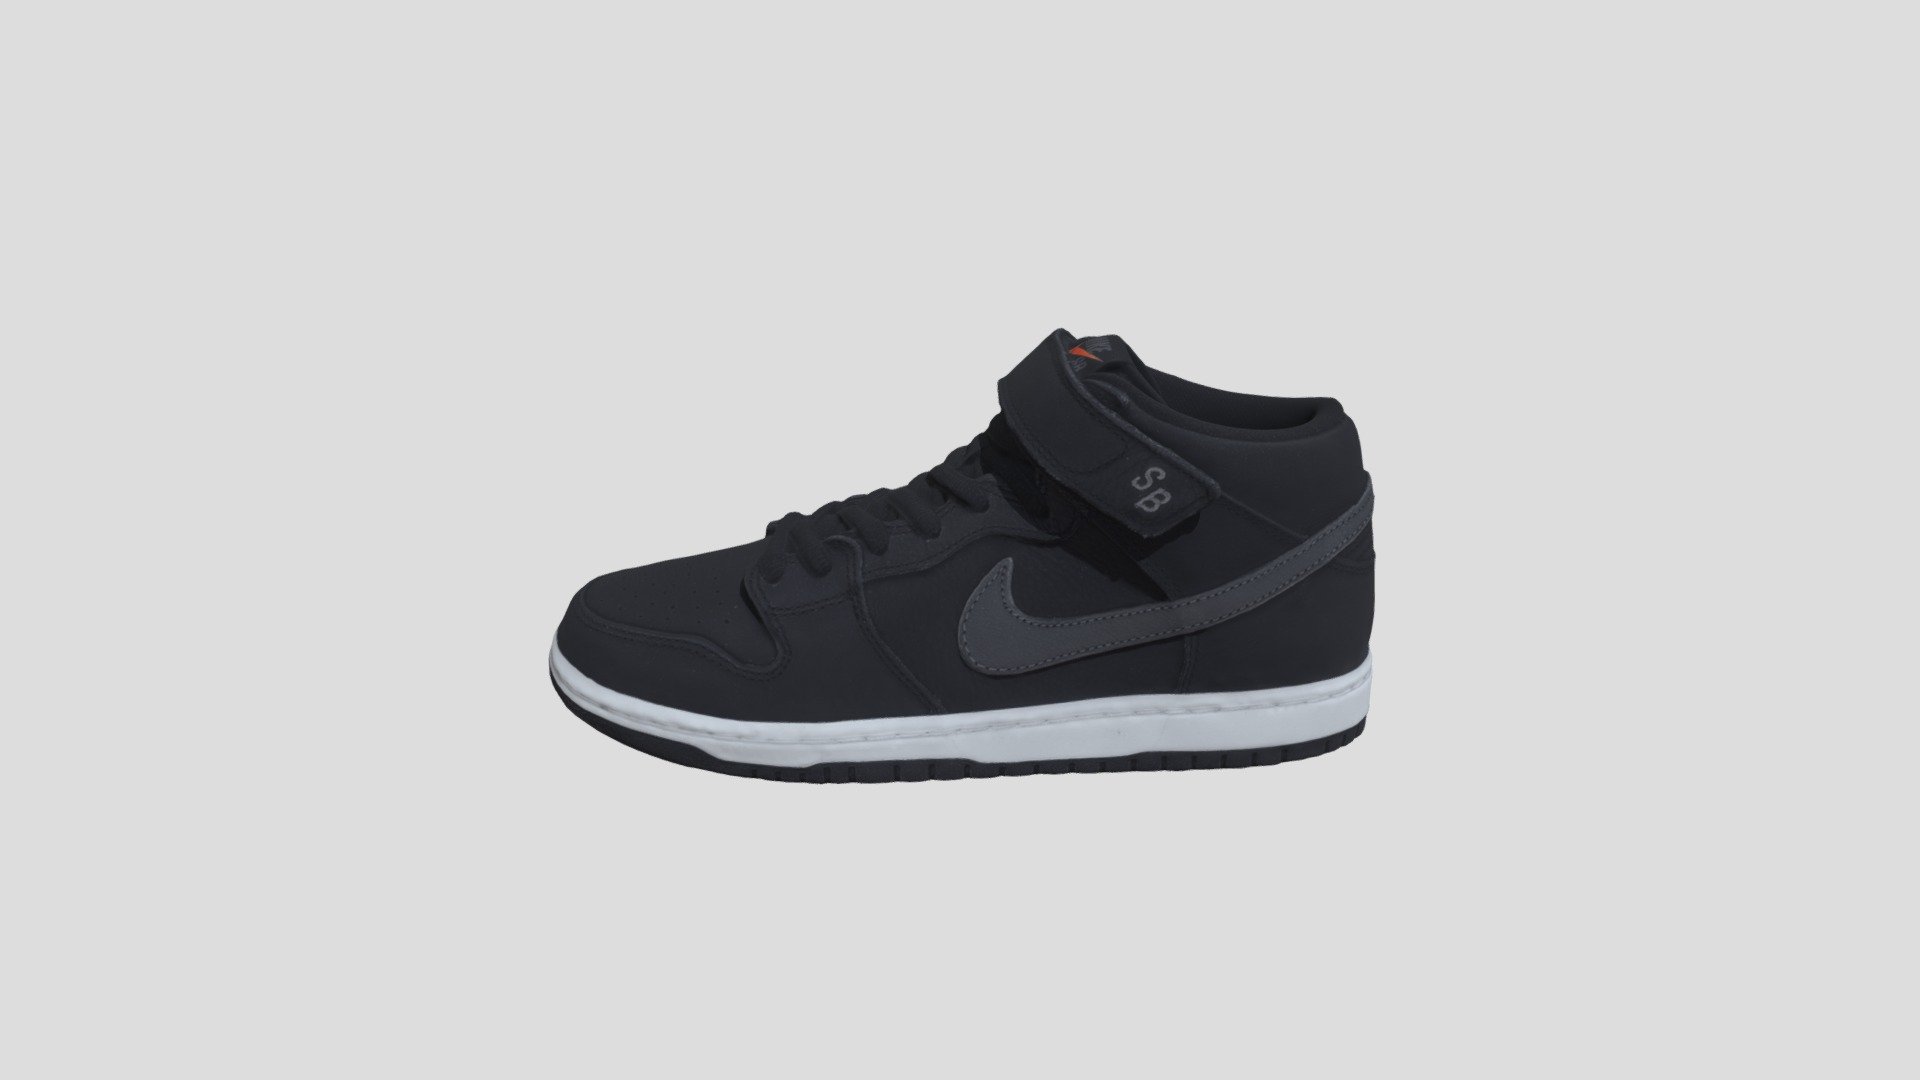 This model was created firstly by 3D scanning on retail version, and then being detail-improved manually, thus a 1:1 repulica of the original
PBR ready
Low-poly
4K texture
Welcome to check out other models we have to offer. And we do accept custom orders as well :) - Nike SB Dunk Mid ISO 黑灰 橙标_CV4283-001 - Buy Royalty Free 3D model by TRARGUS 3d model